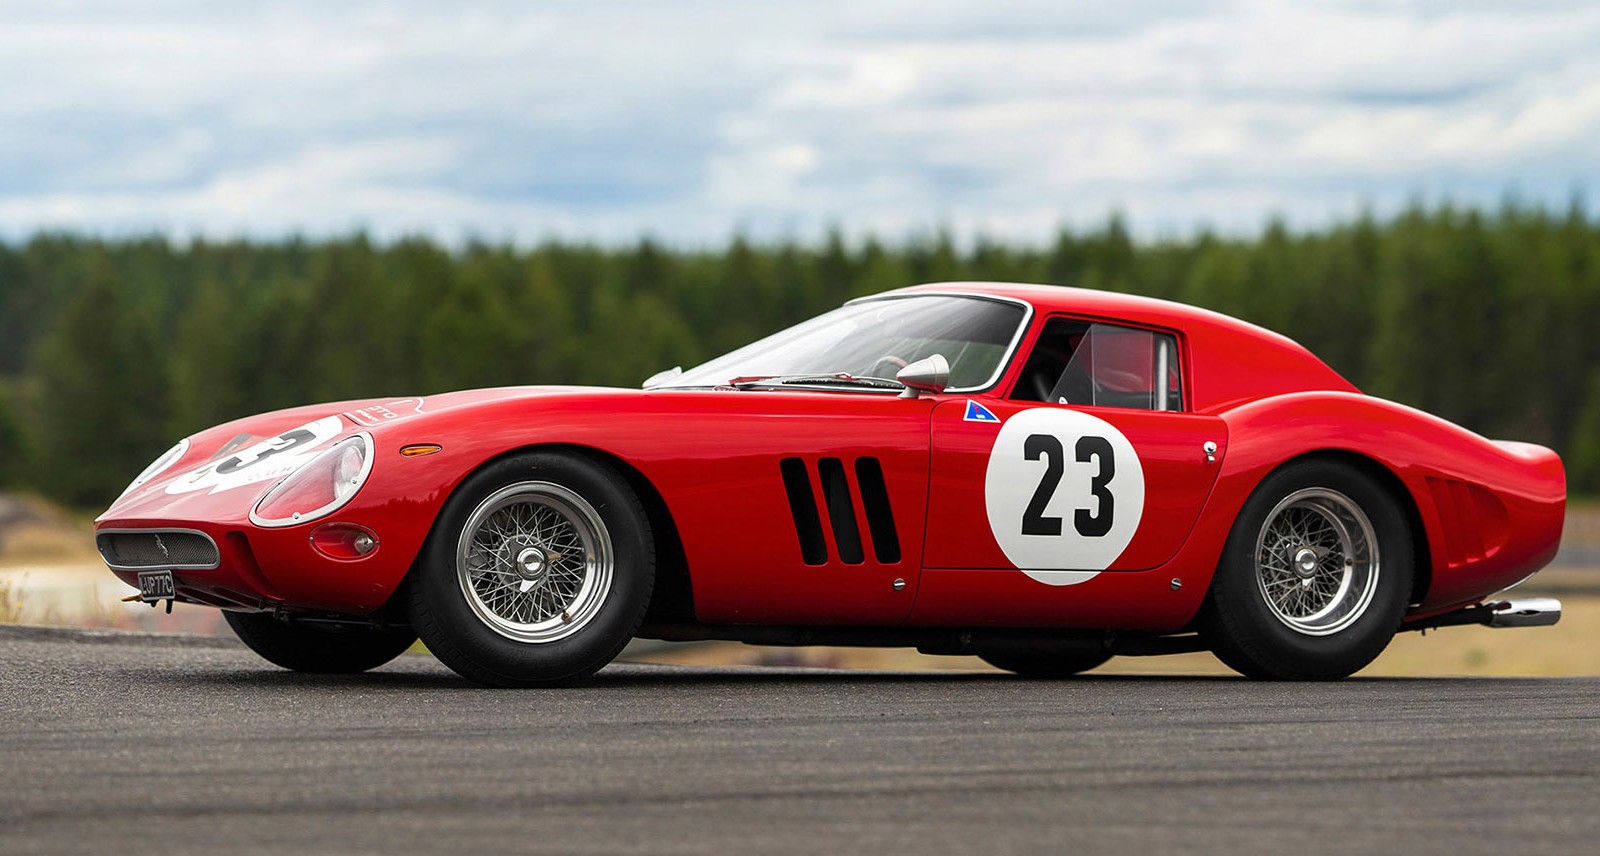 A Rare 1962 Ferrari 250 GTO Just Became the Most Expensive Car Ever Sold at Auction